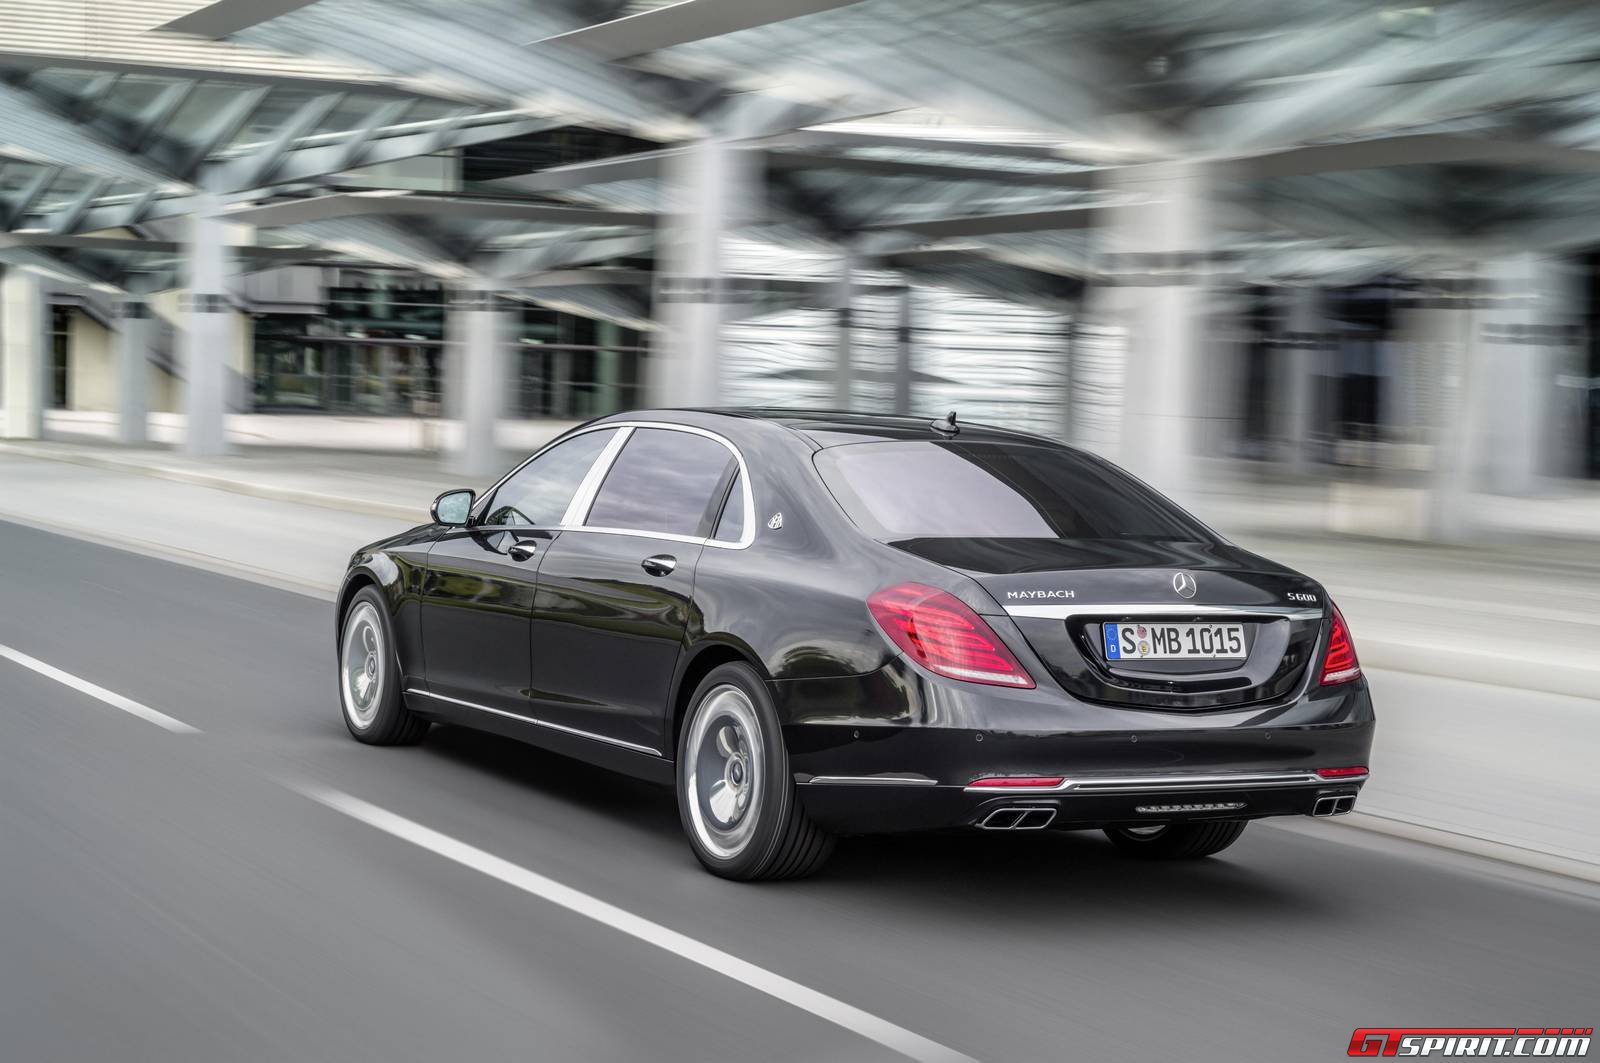 2015-mercedes-maybach-s600-4